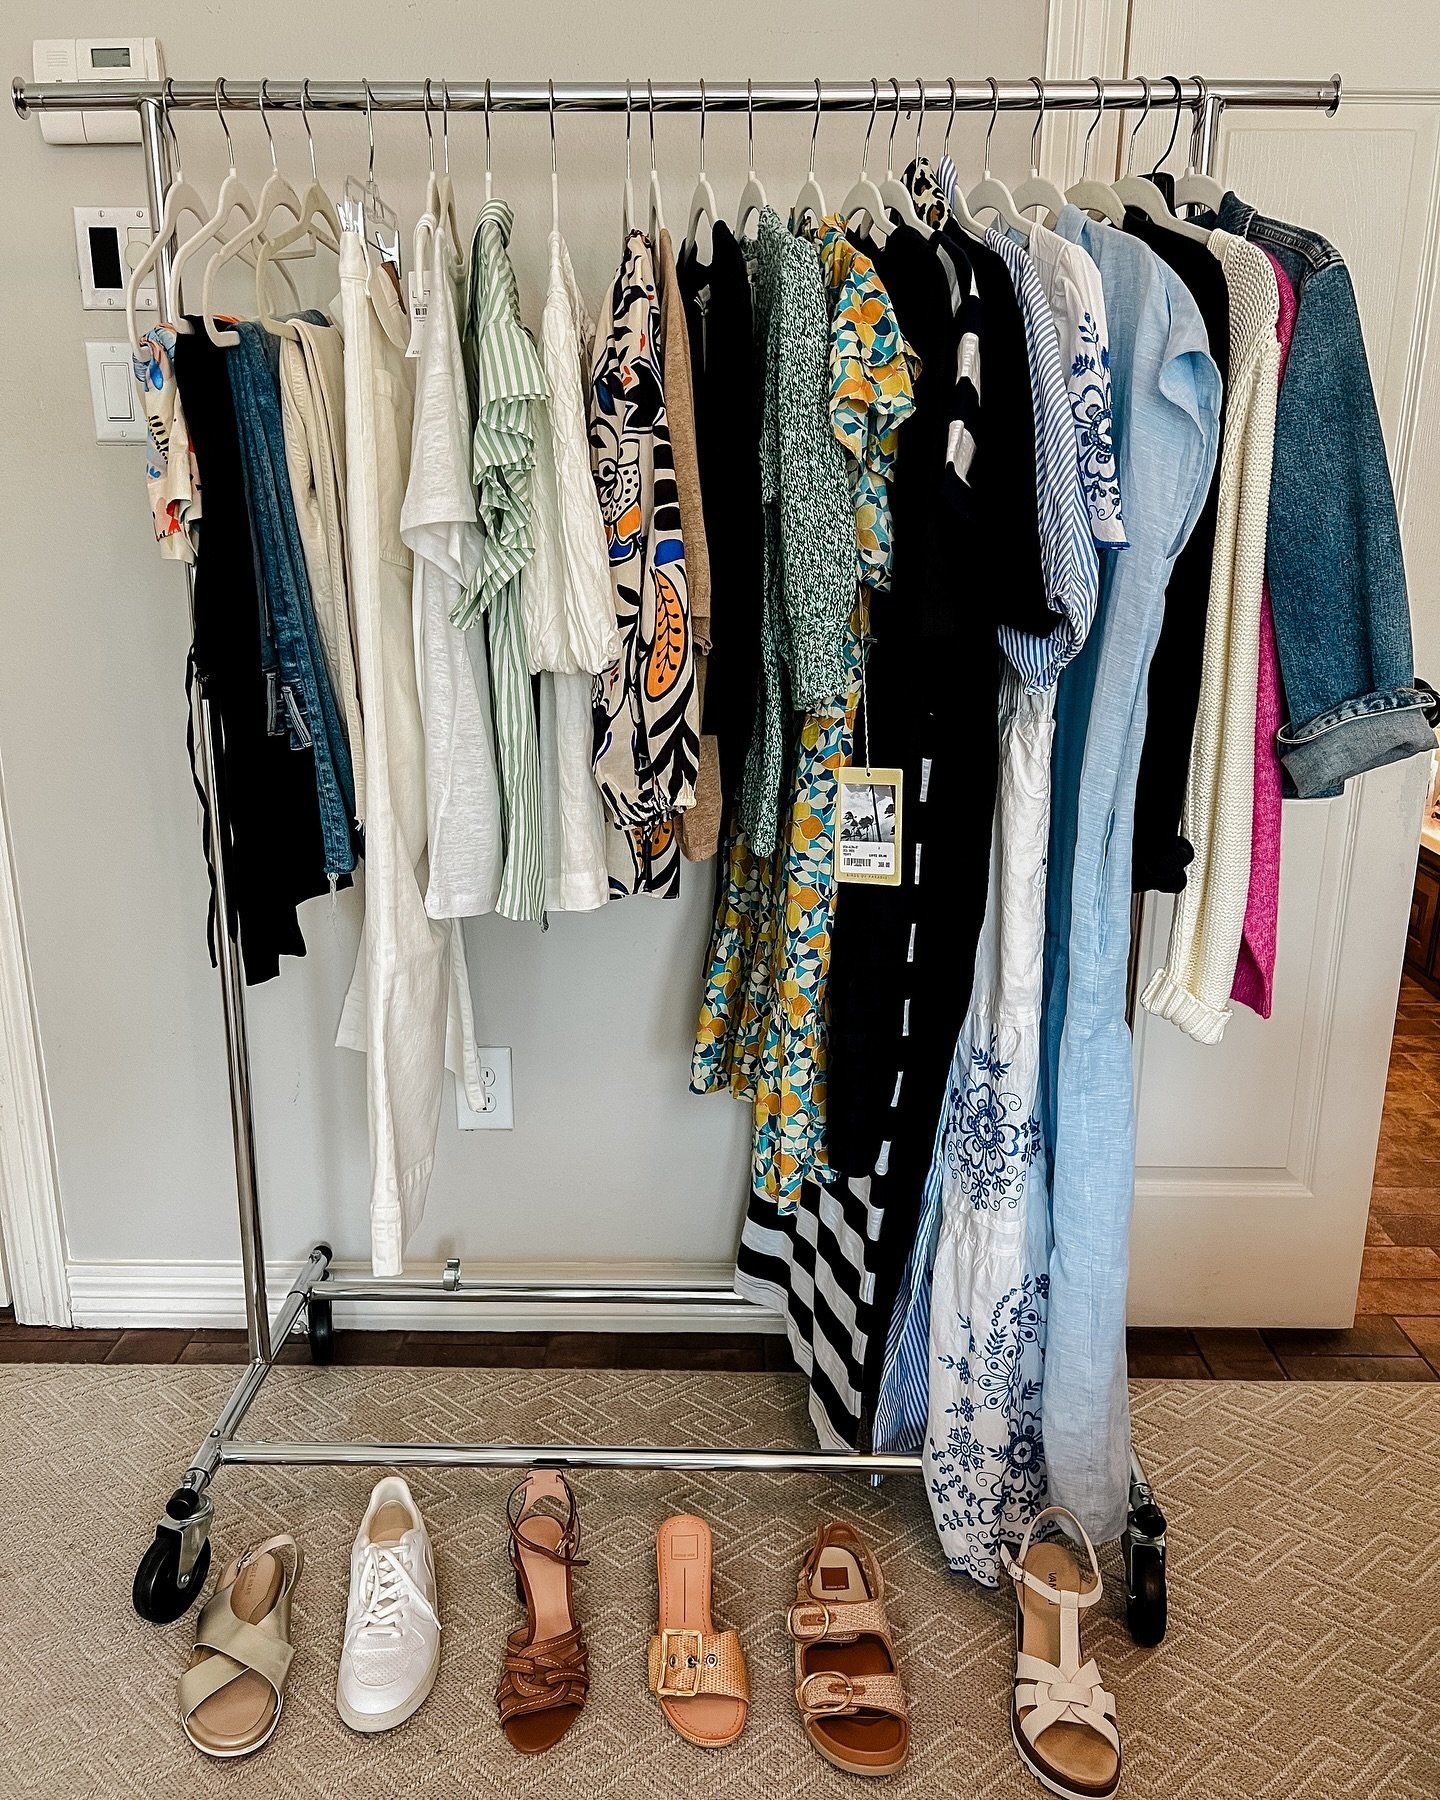 Styling Session - packing edition for today&rsquo;s client. This is more than she needs for her upcoming trip to Italy, but we like options 😊 We stuck to a color palette of white/cream, navy/blue, black and a few pops of color. We&rsquo;ve got two b